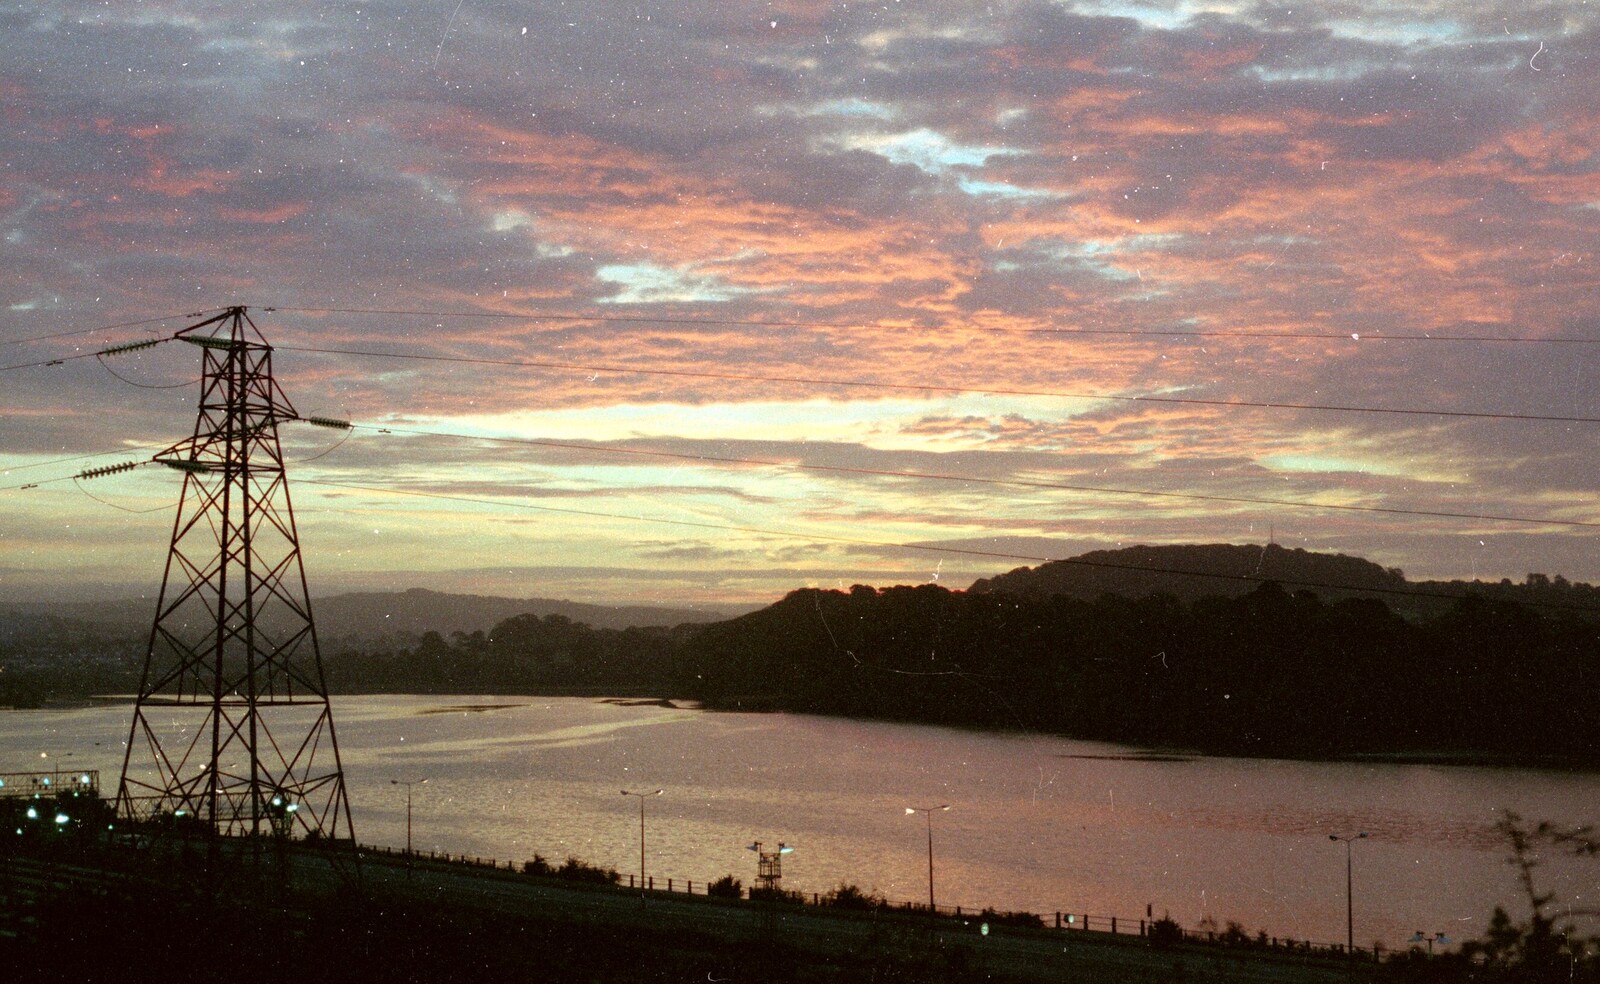 Sunrise and a pylon, looking over Embankment Road from Uni: A Neath Road Summer, St. Jude's, Plymouth - 18th August 1987